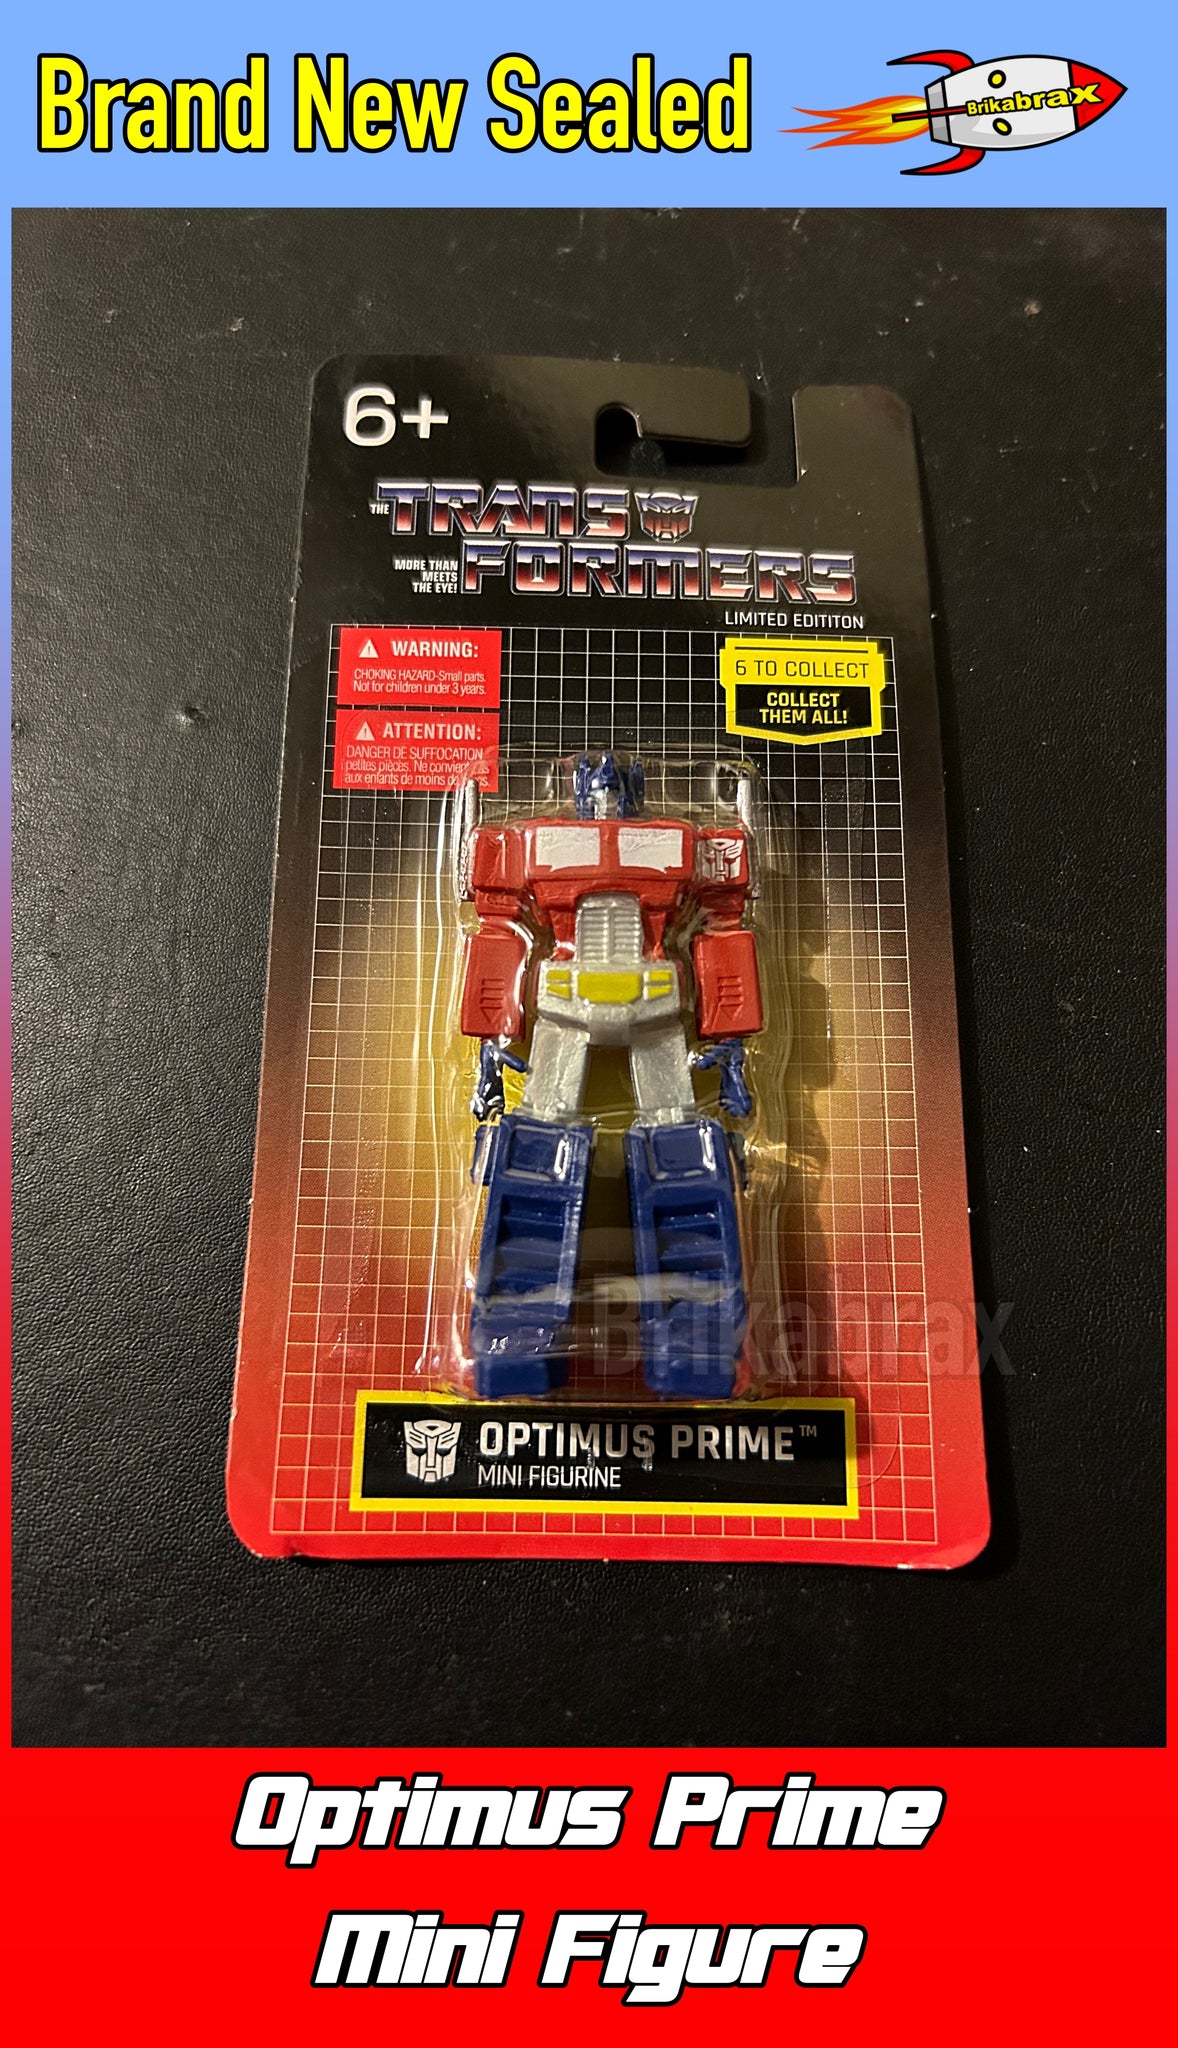 Transformers 2.5" Mini Action Figures Limited Edition (Select Item) New Sealed